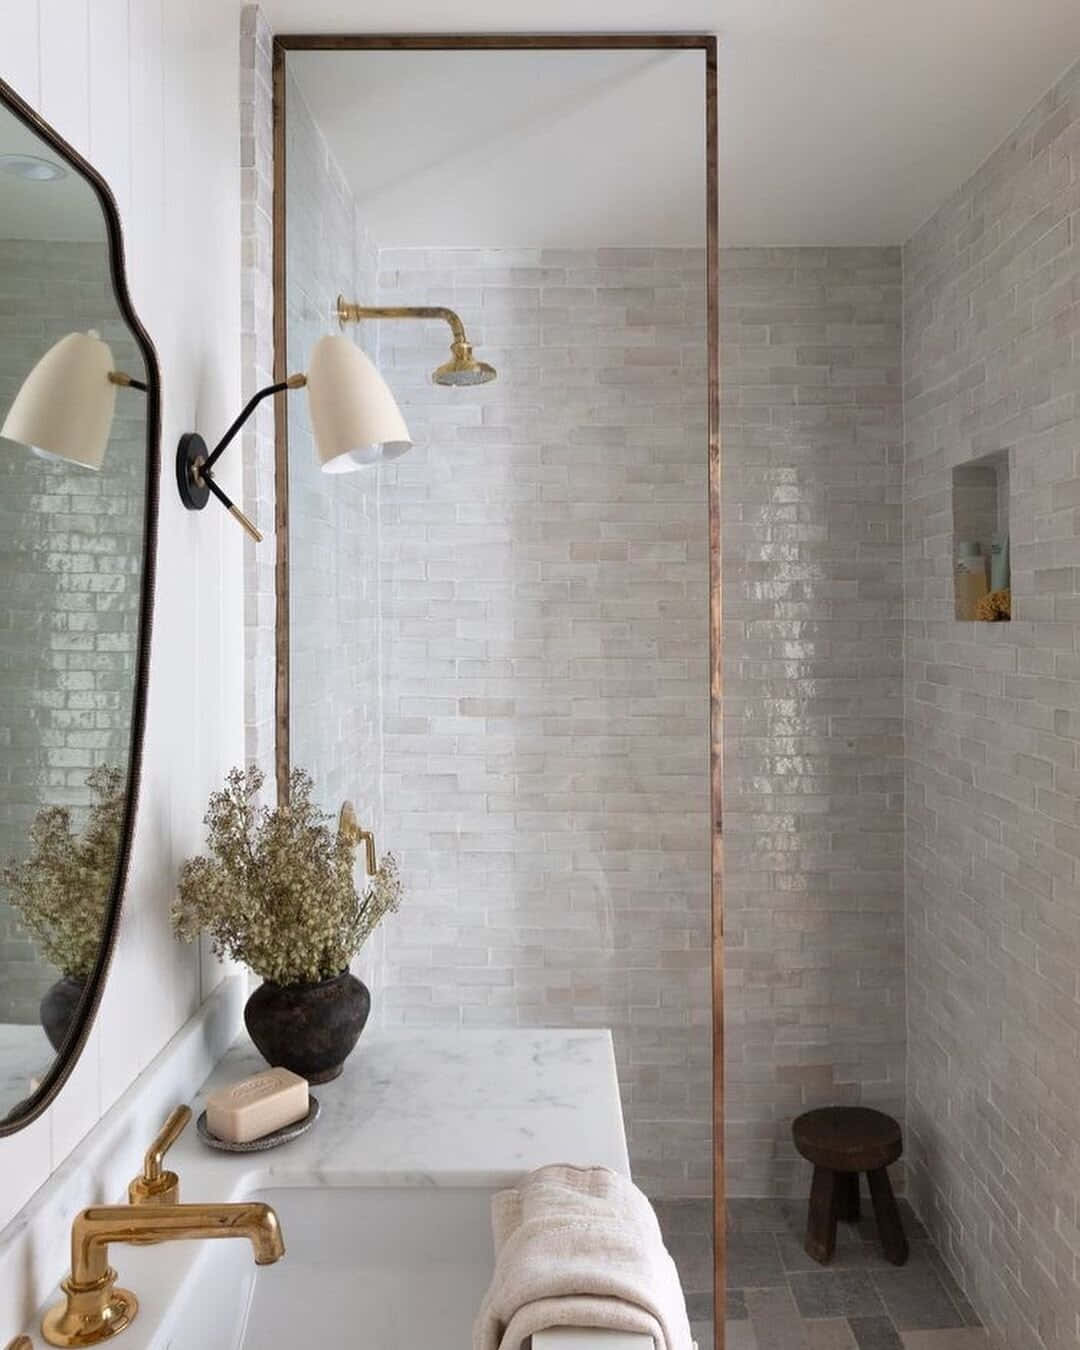 A Bathroom With A White Tiled Shower And Brass Fixtures